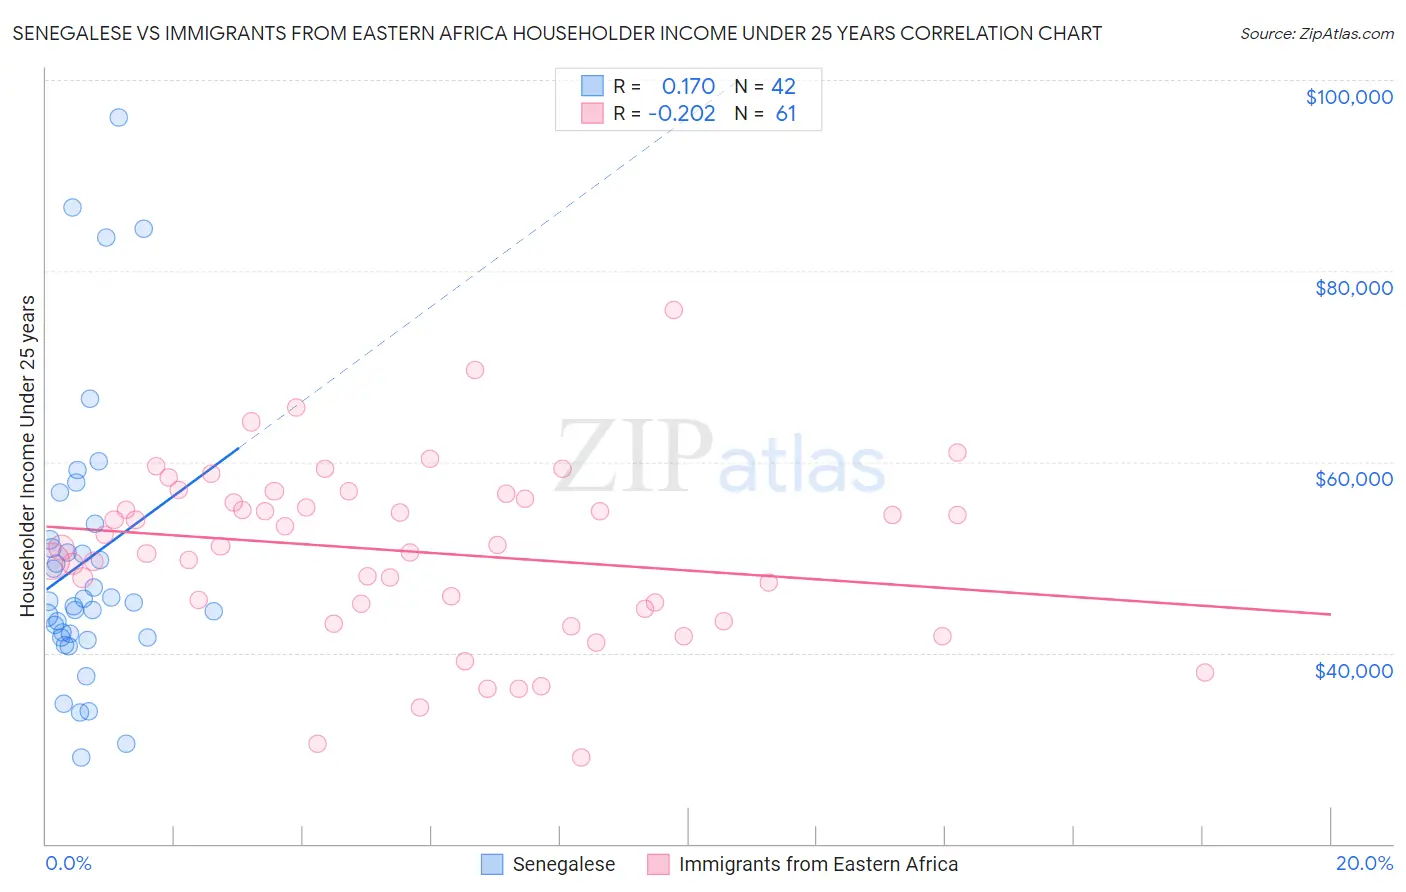 Senegalese vs Immigrants from Eastern Africa Householder Income Under 25 years